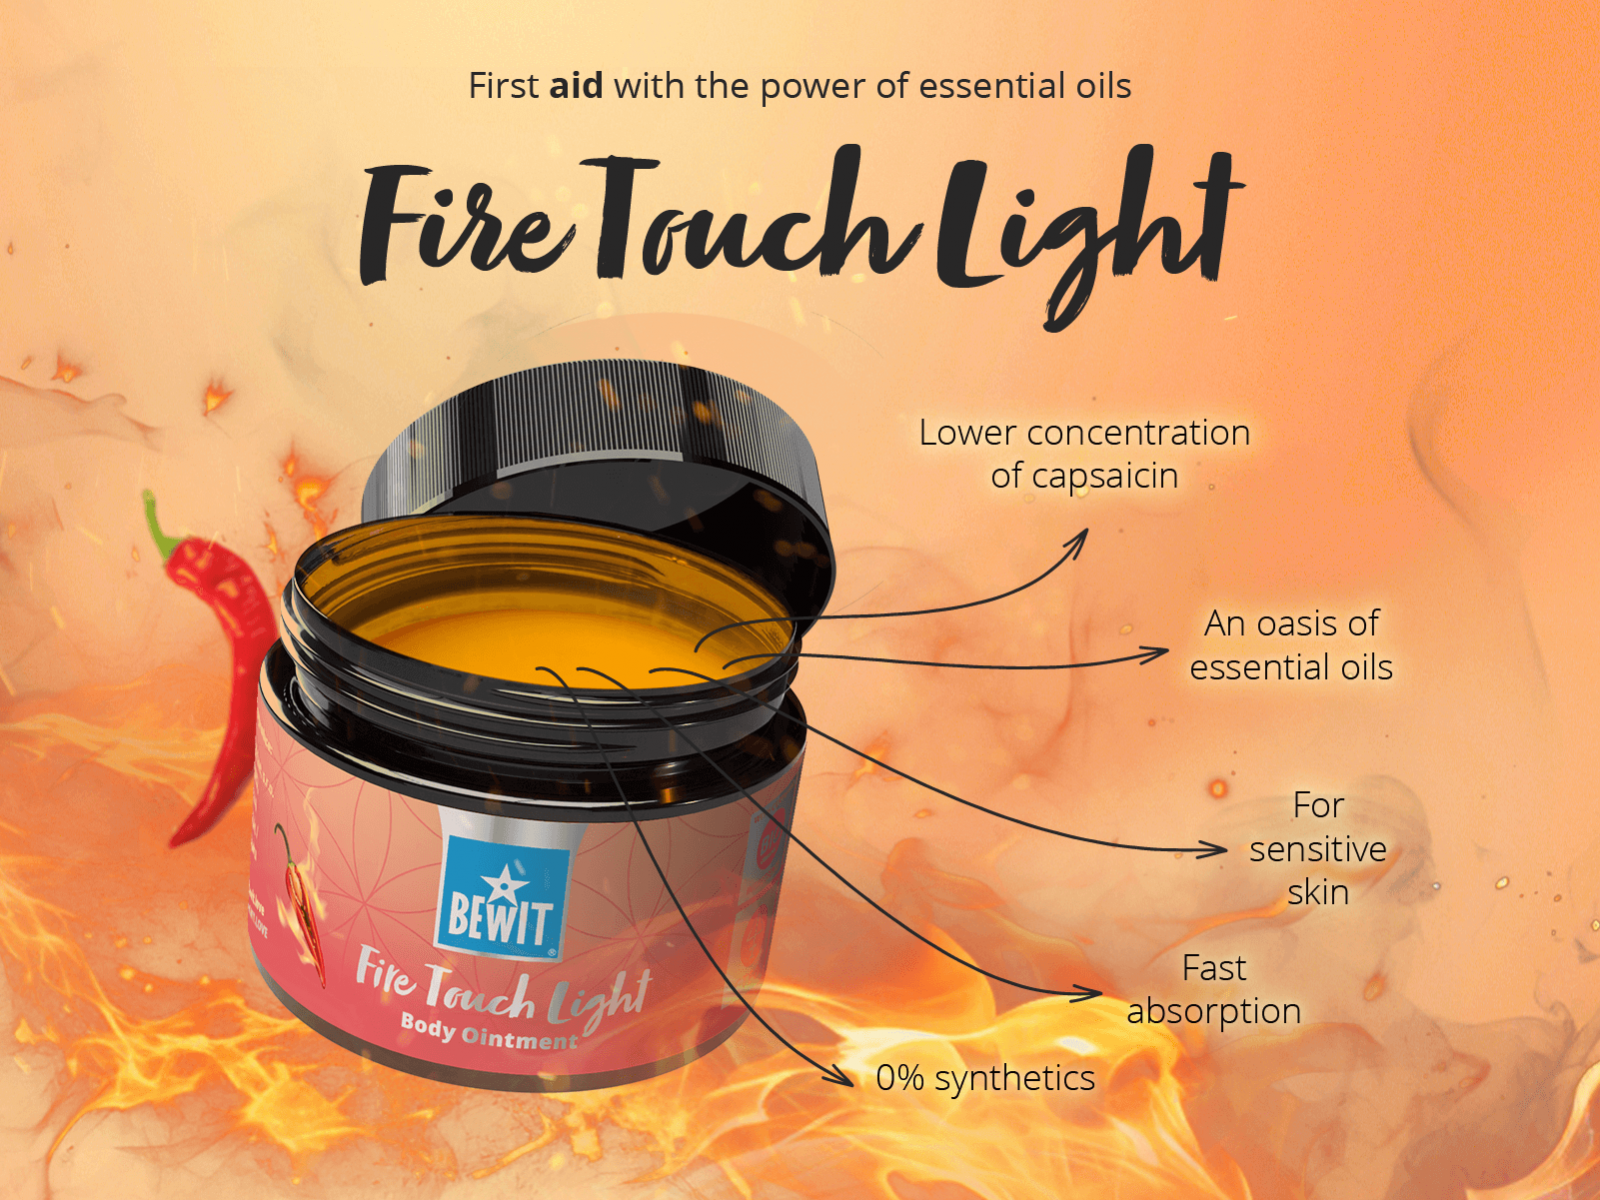 BEWIT Ice And Fire, Light - Discounted package of gentle cooling and gentle energising ointment - 2